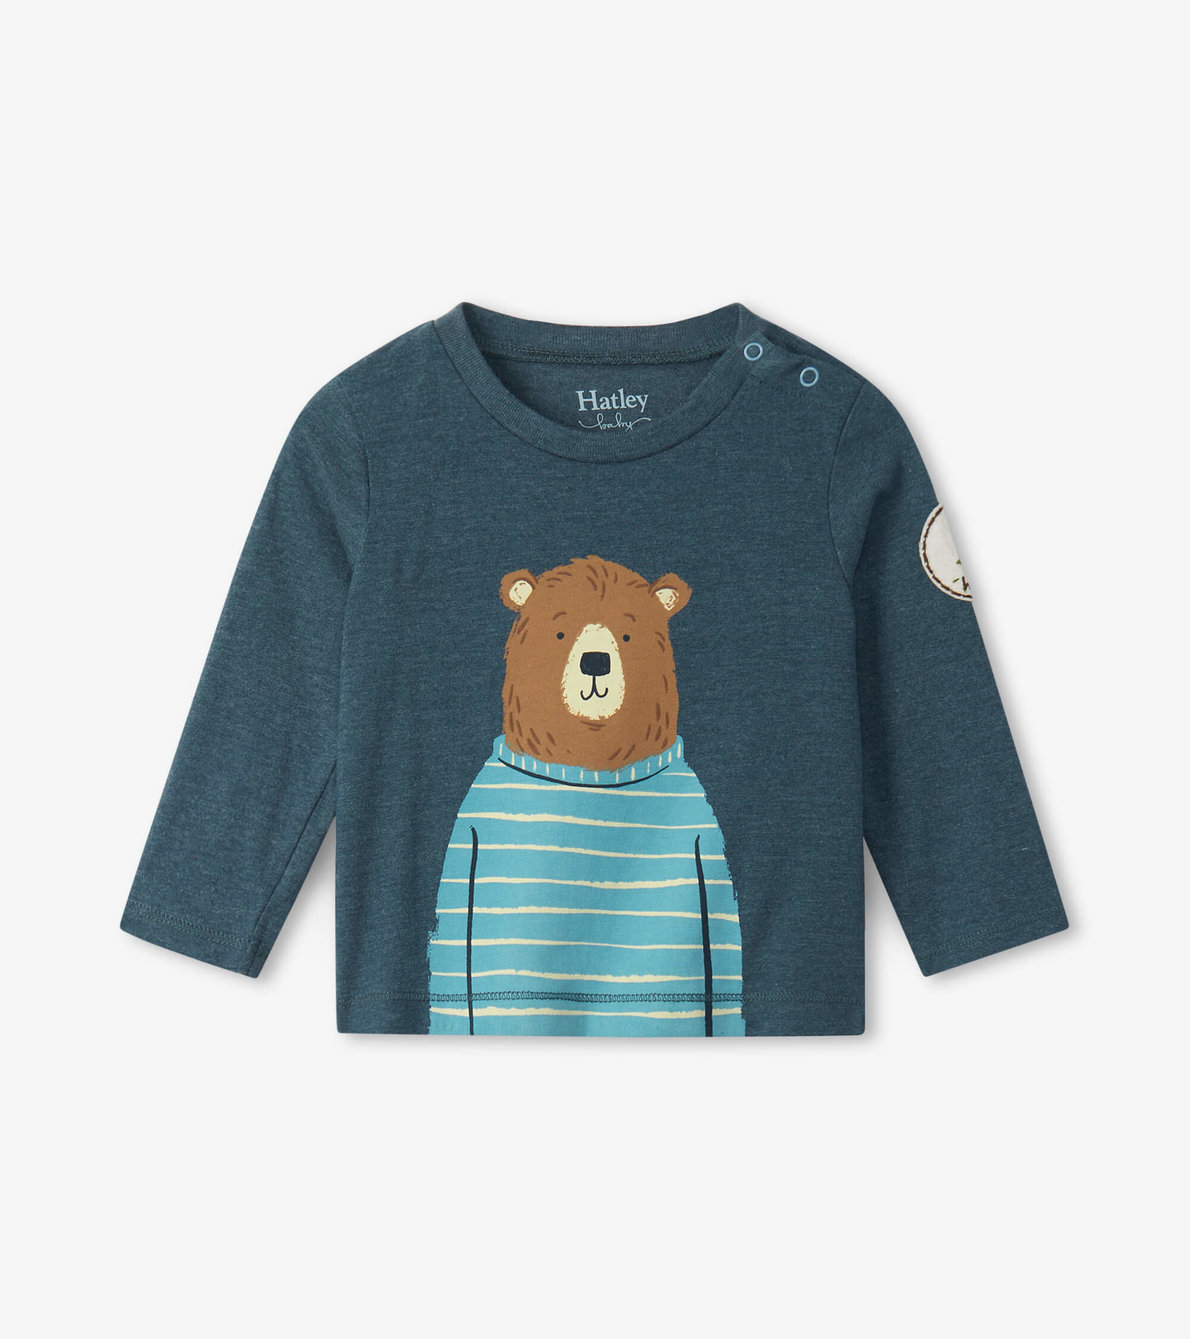 View larger image of Cozy Bear long sleeve baby tee